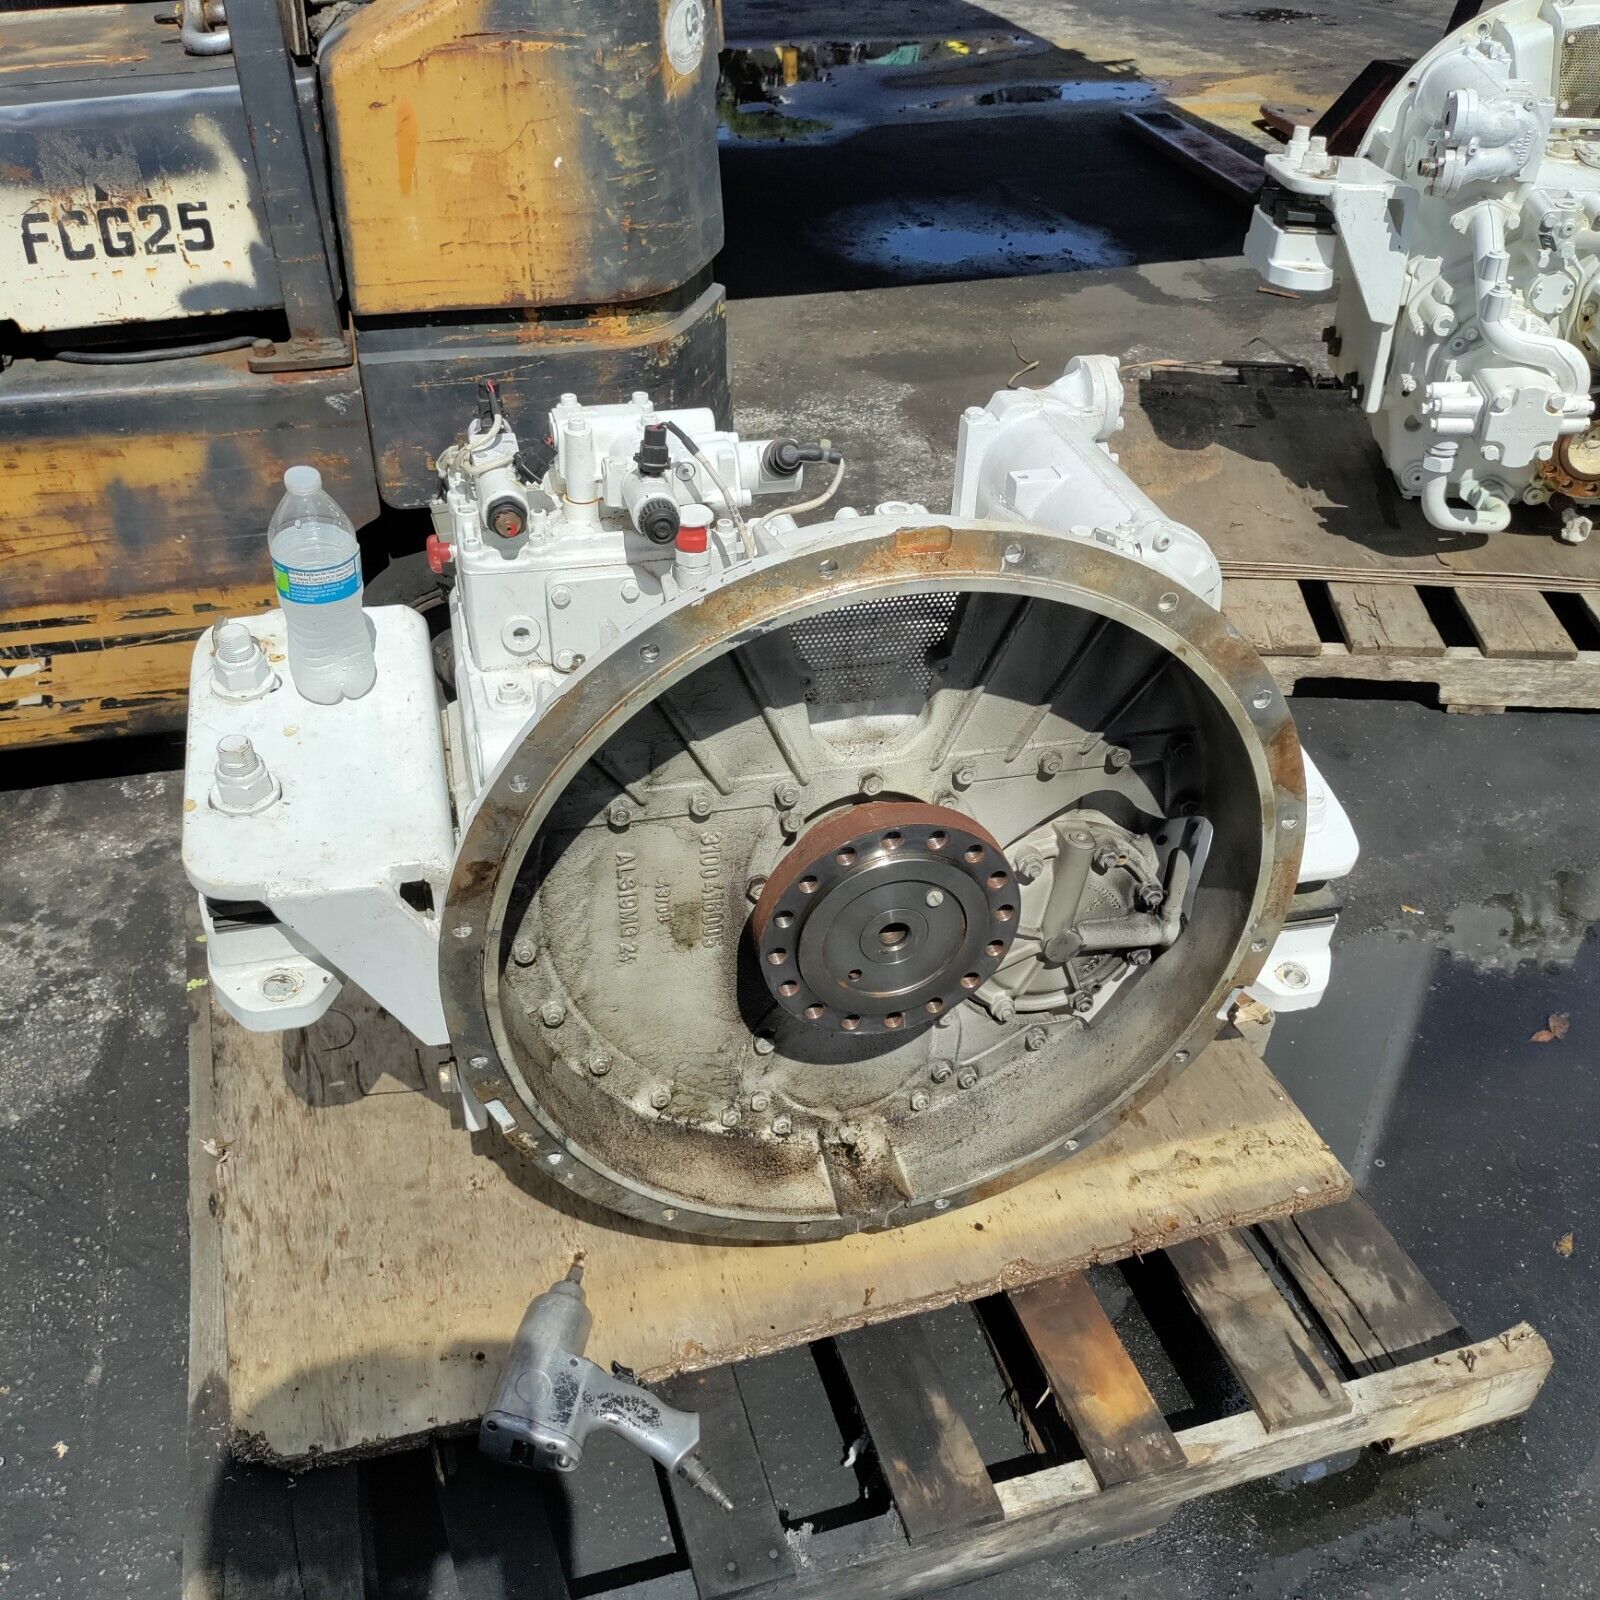 ZF MARINE ZF 2070, 1.765 to 1 RATIO TRANSMISSION  / GEAR BOX  / RECENT TAKE OUTS